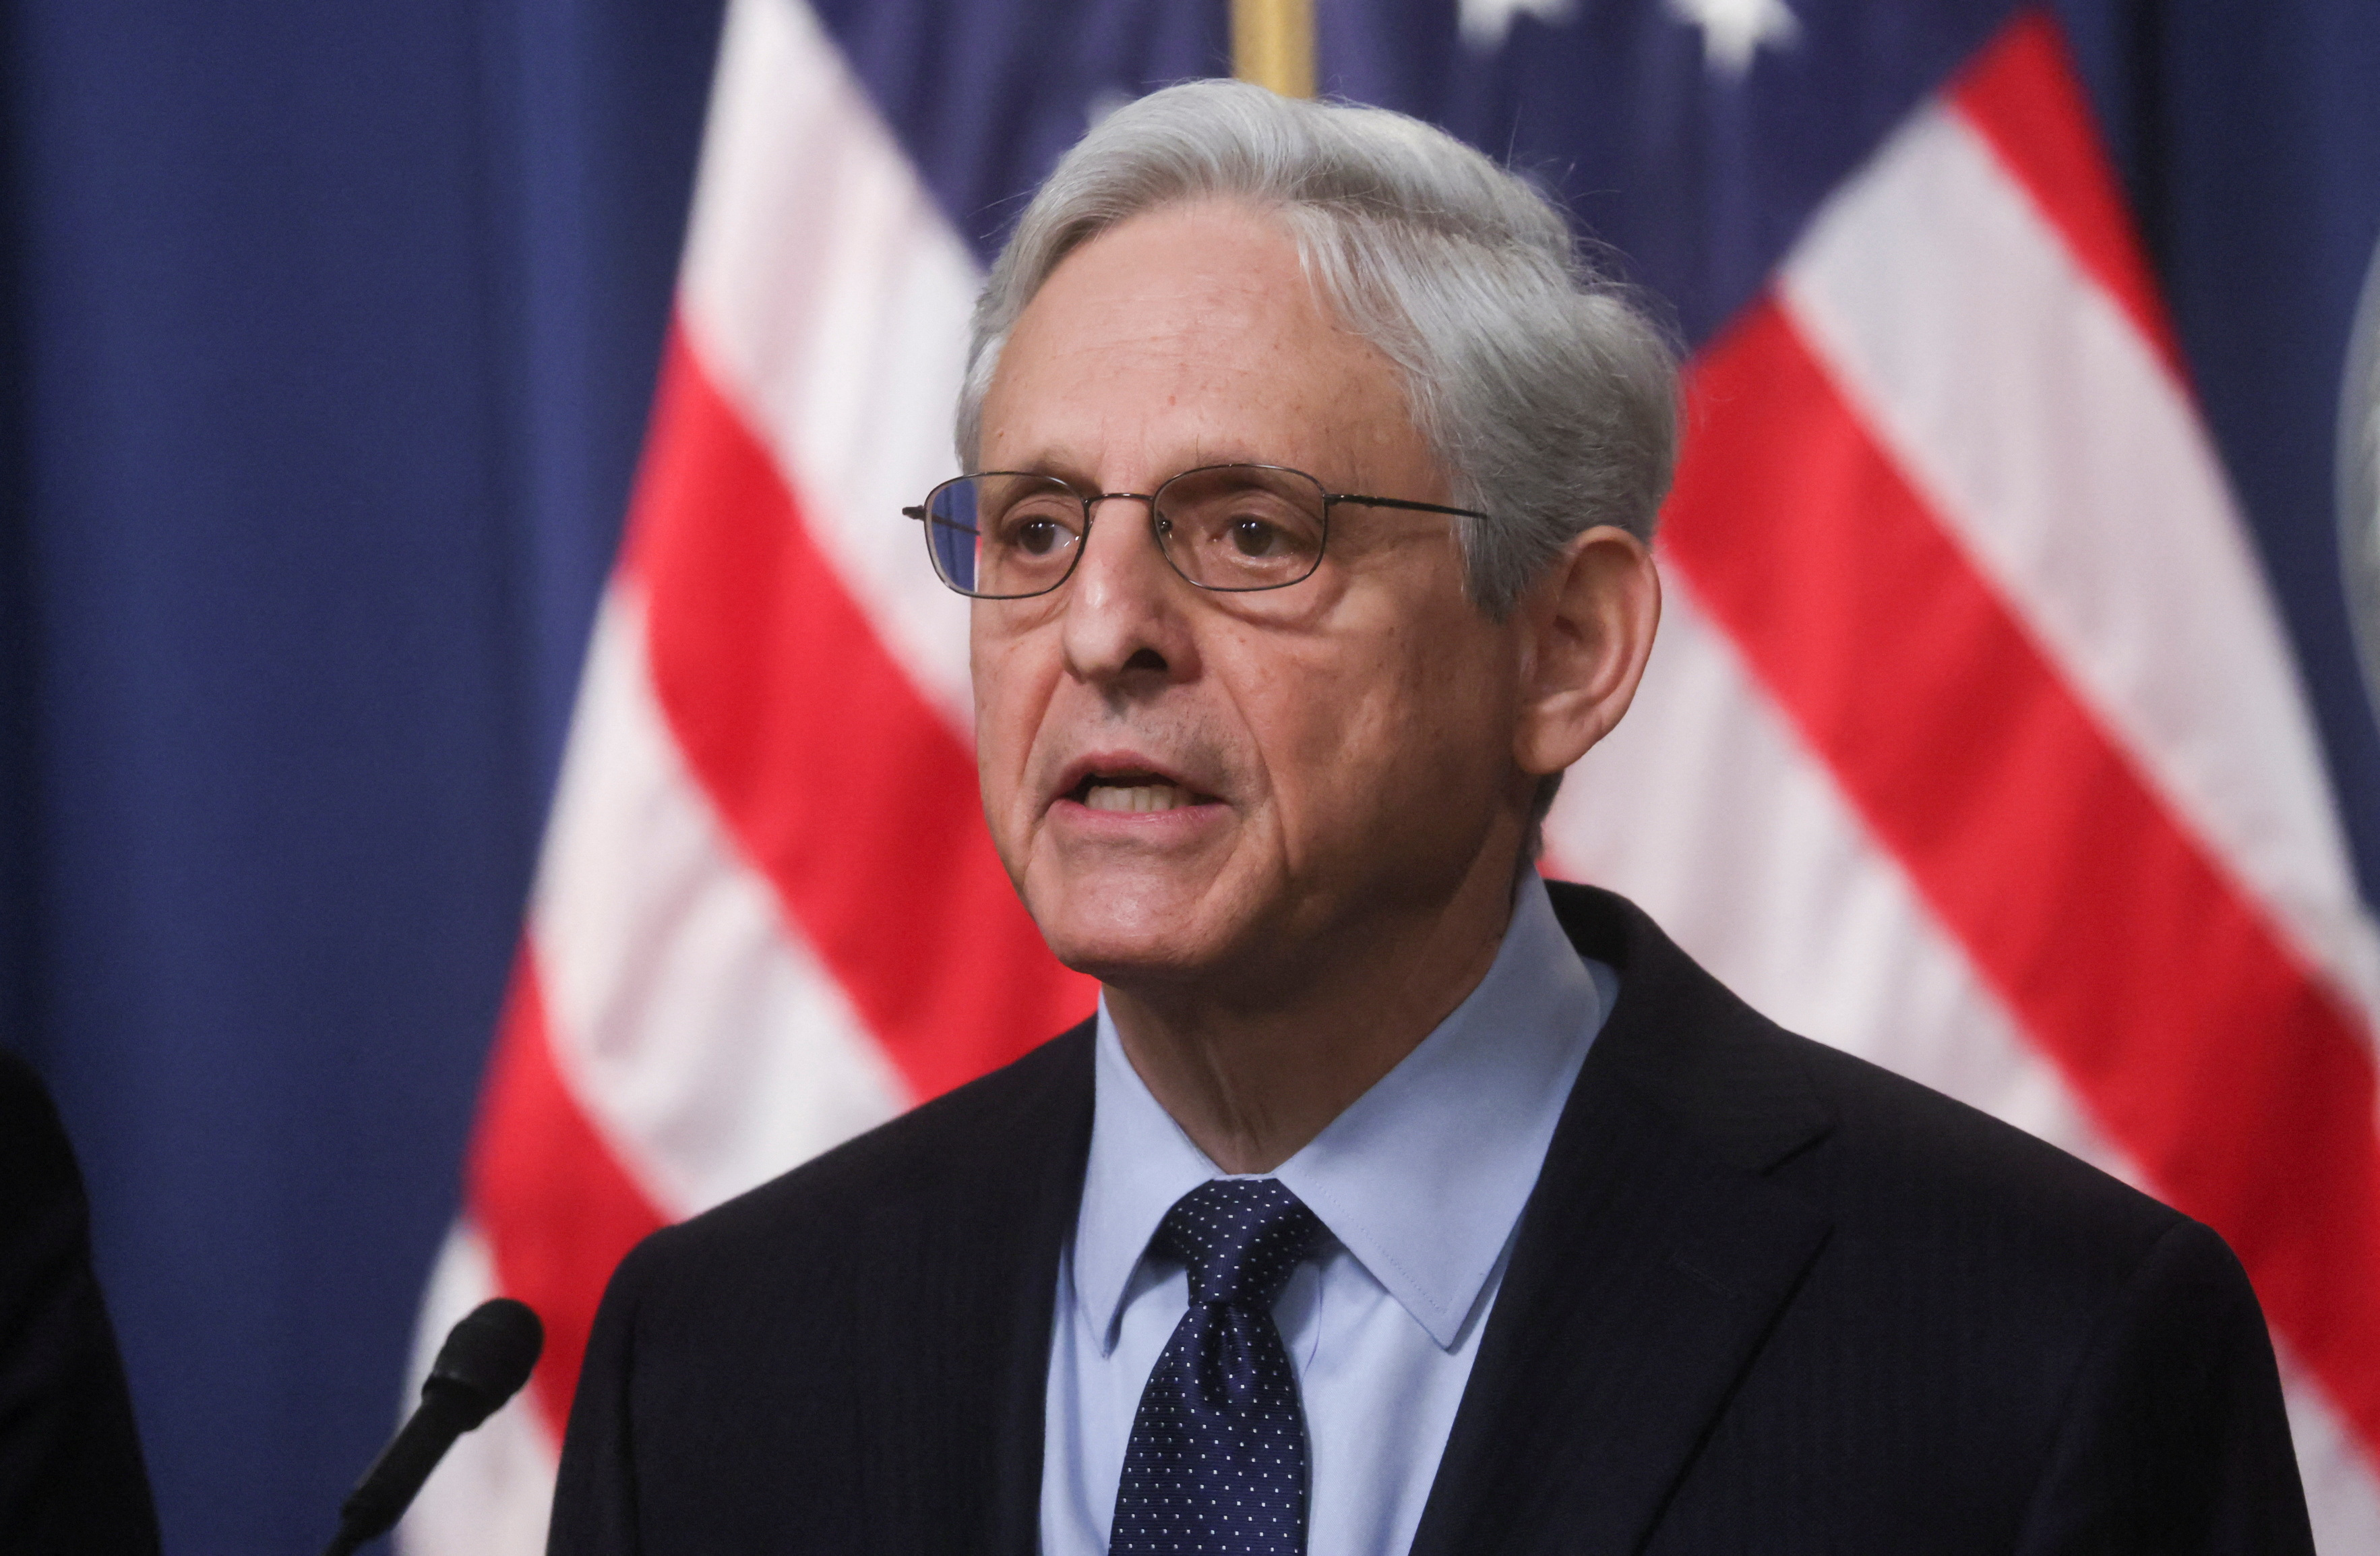 Attorney General Merrick Garland has appointed former Maryland U.S. Attorney Robert Harr as special counsel to investigate any potential wrongdoing surrounding the Biden documents.  (Reuters)